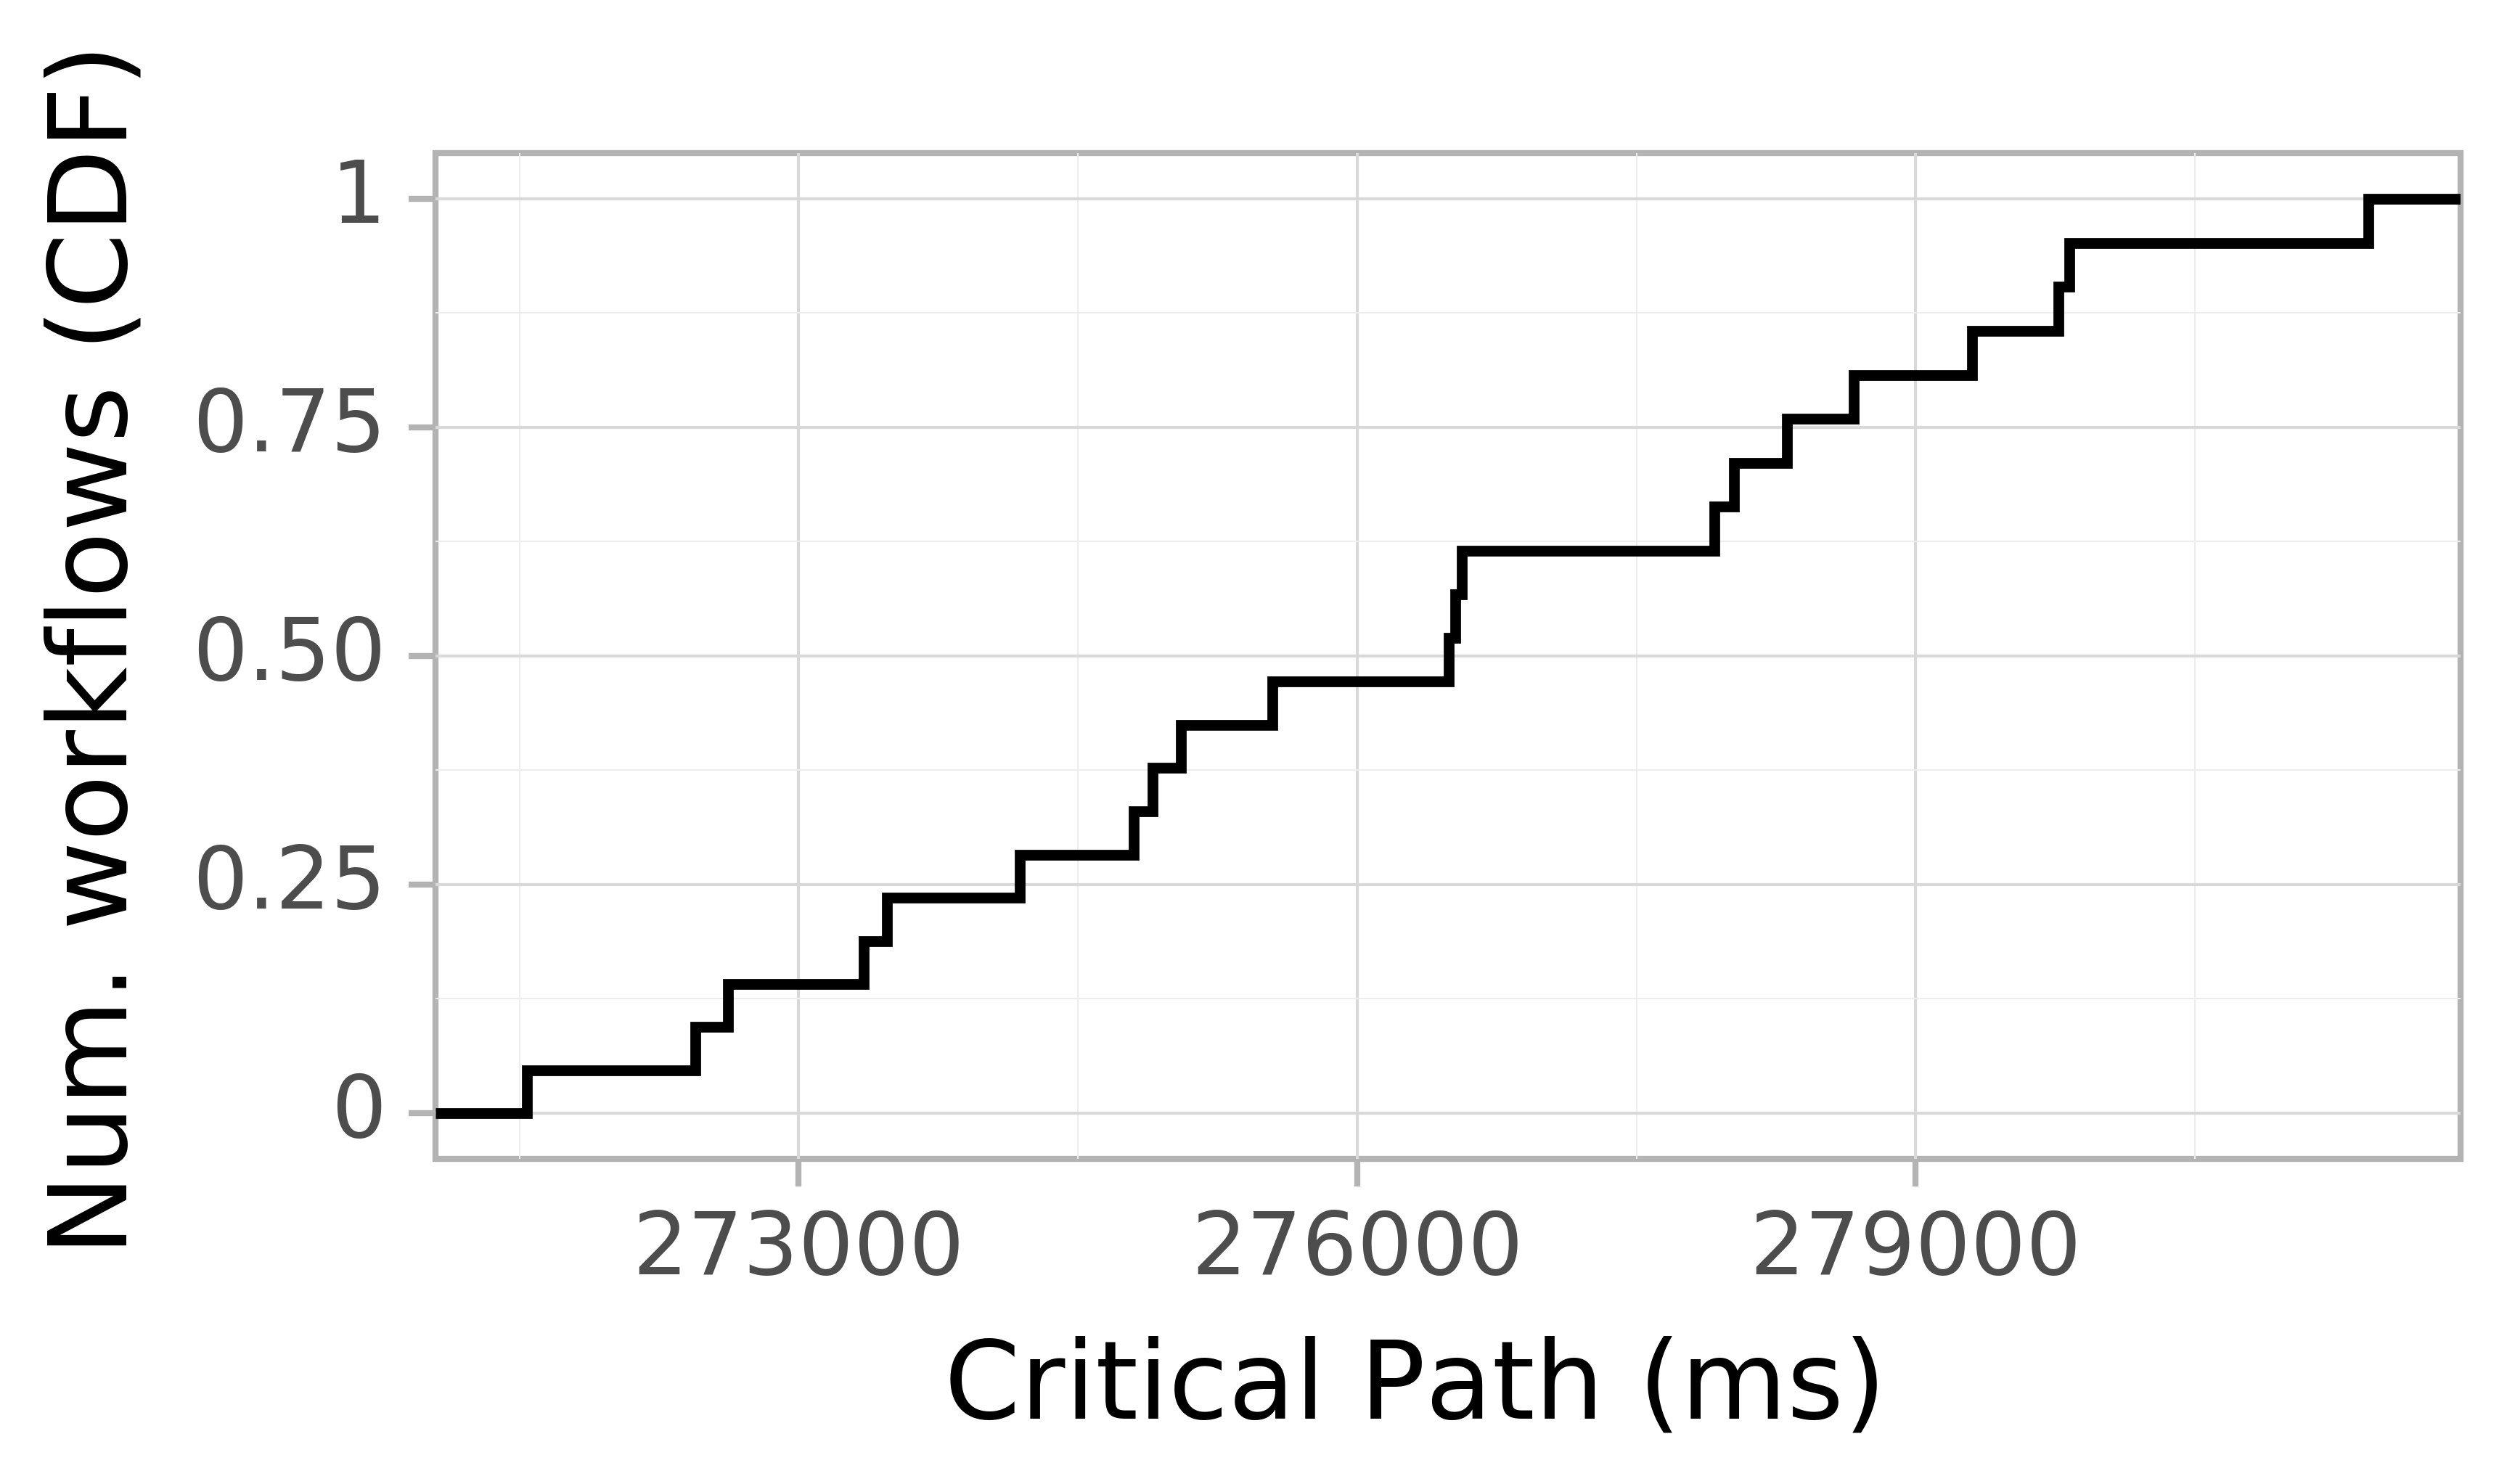 Job runtime CDF graph for the askalon-new_ee23 trace.